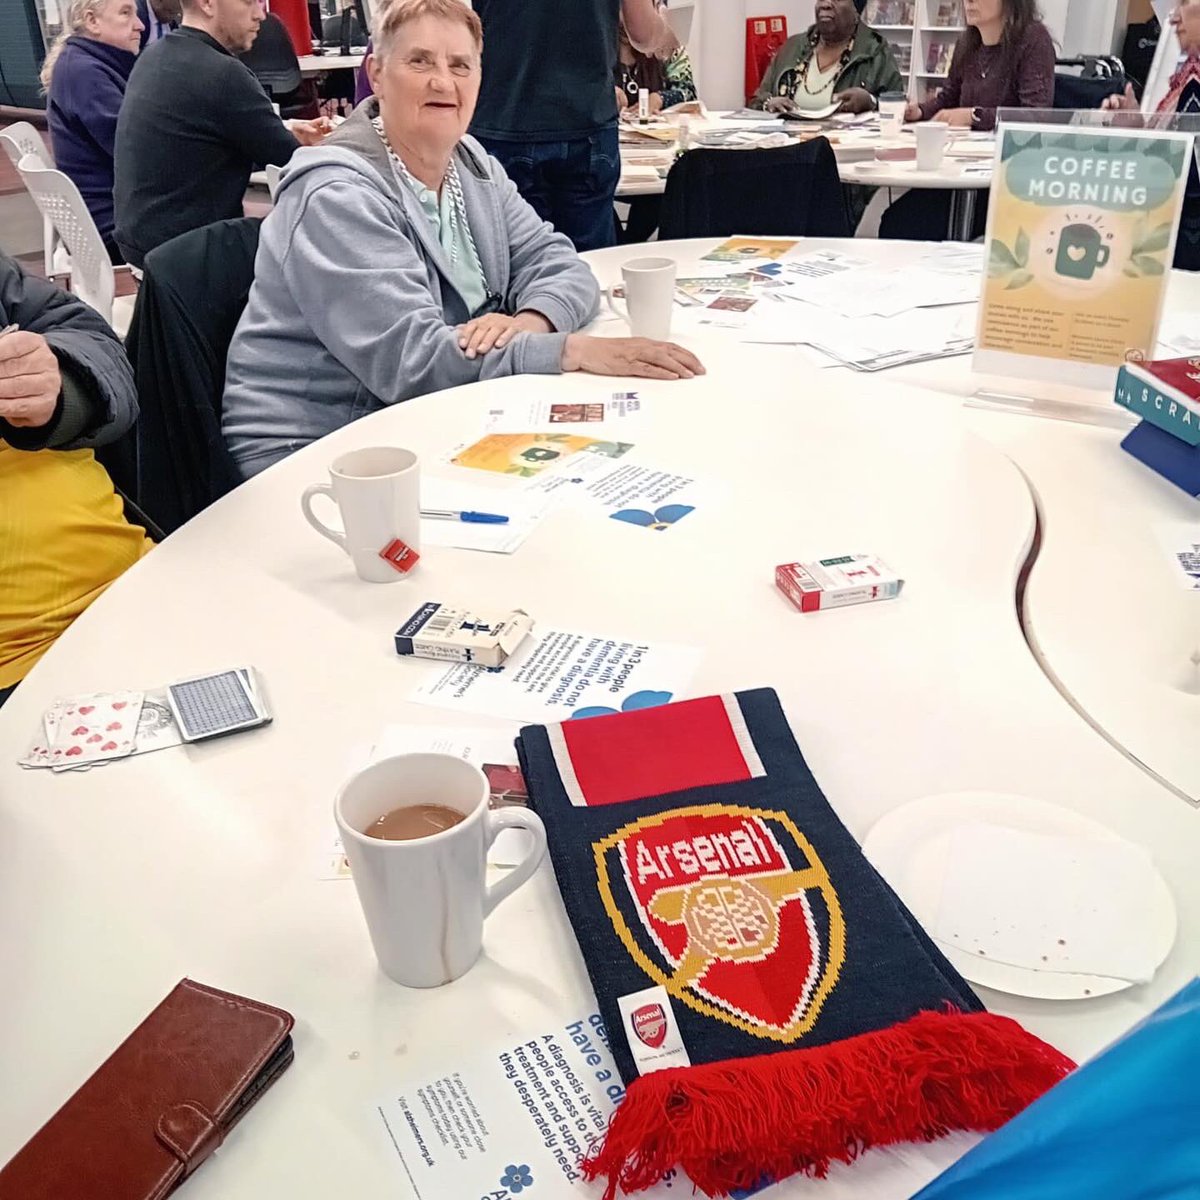 It's #MentalHealthAwarenessWeek & #DementiaActionWeek. #WoolwichLibrary is busy and enjoying crafts, coffee & journal making at the community #CoffeeMorning. Other football teams are available! ☕️ #LoveYourLibrary